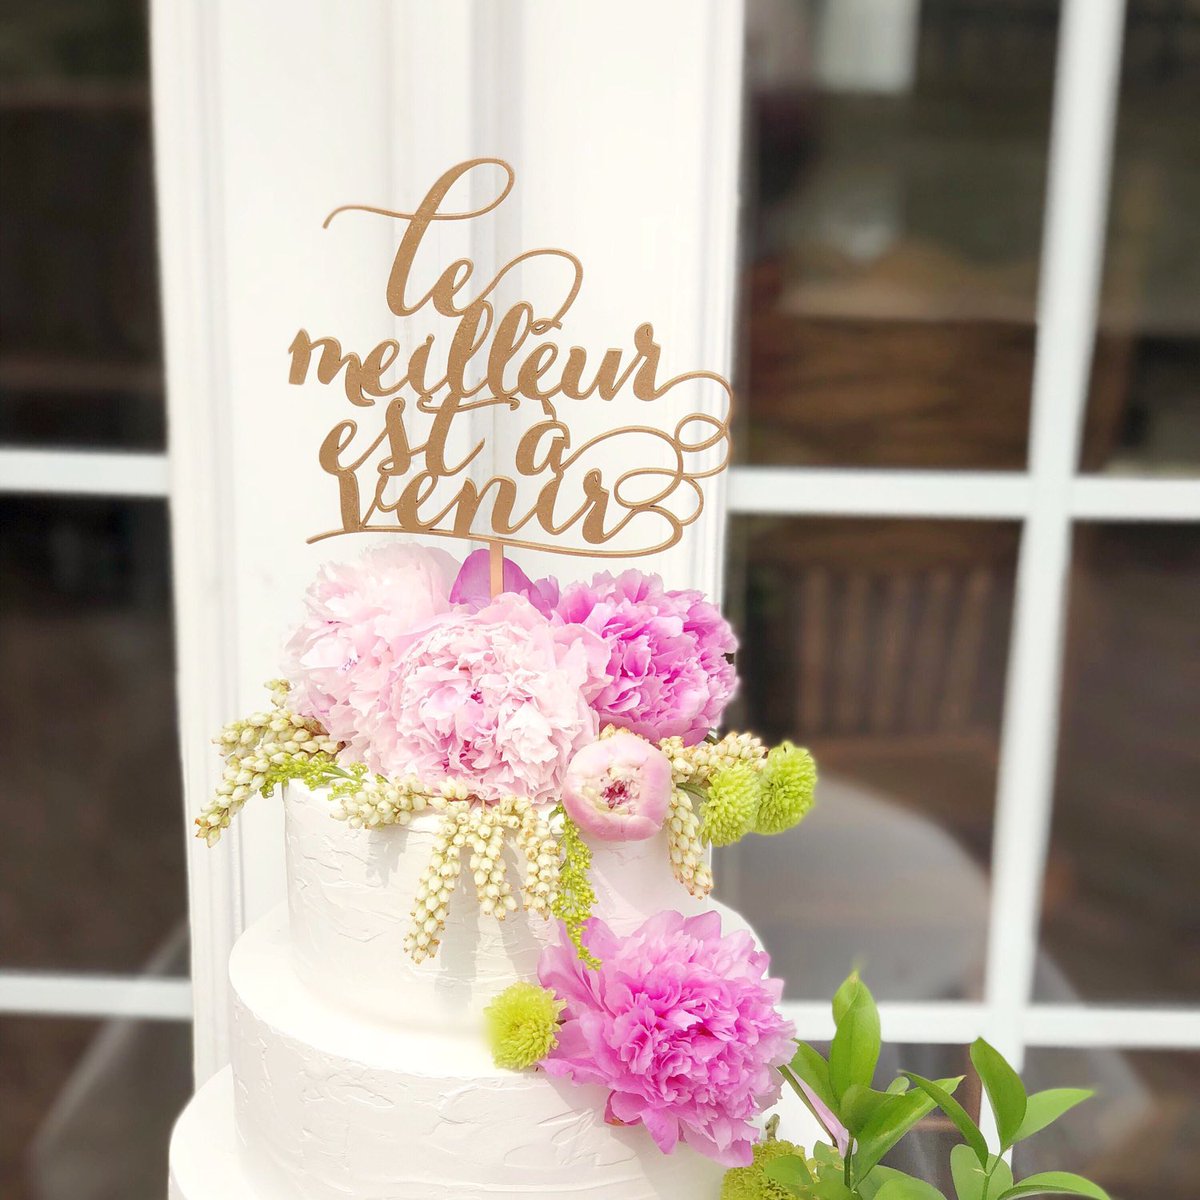 Excited to share this item from my #etsy shop: Wedding Cake Topper Est à Venire - Cake Topper in French #provencewedding #weddinginfrance #frenchweddingdecor #frenchcaketopper #caketopperfrench #parisiandecor #countryfrench #frenchweddings #cake etsy.me/3LXkecu